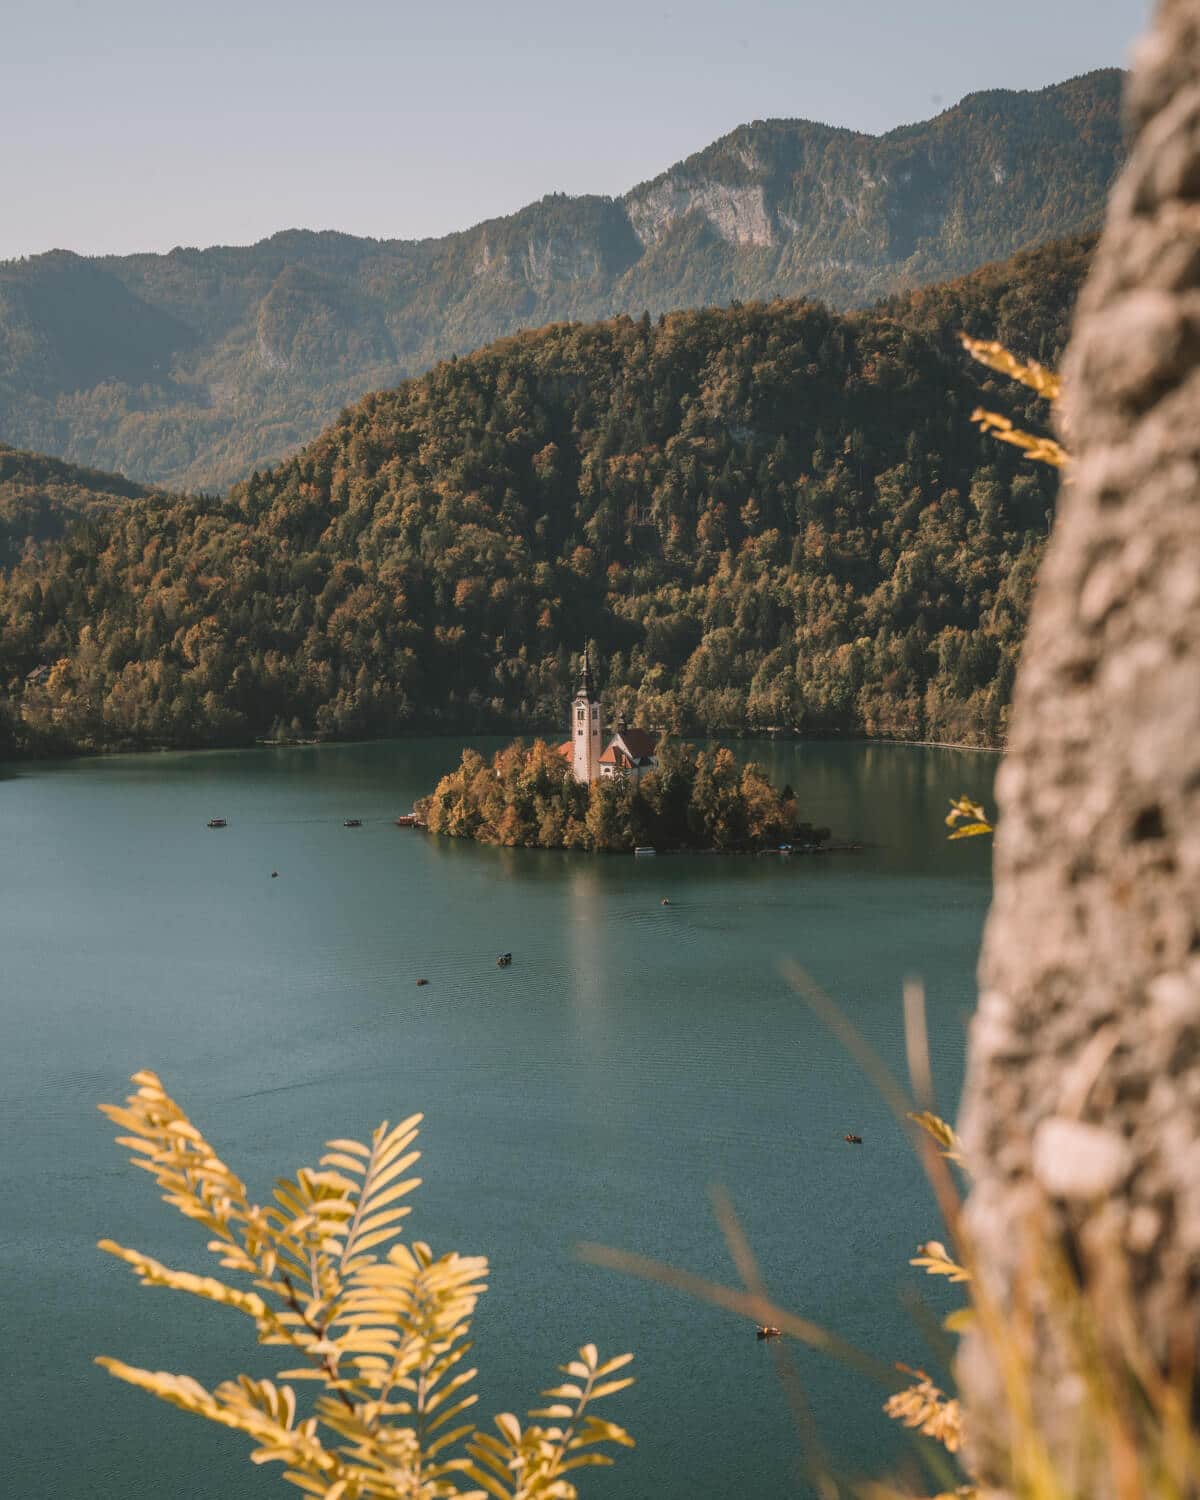 10 Reasons Why Slovenia Needs to Be On Your Bucket List